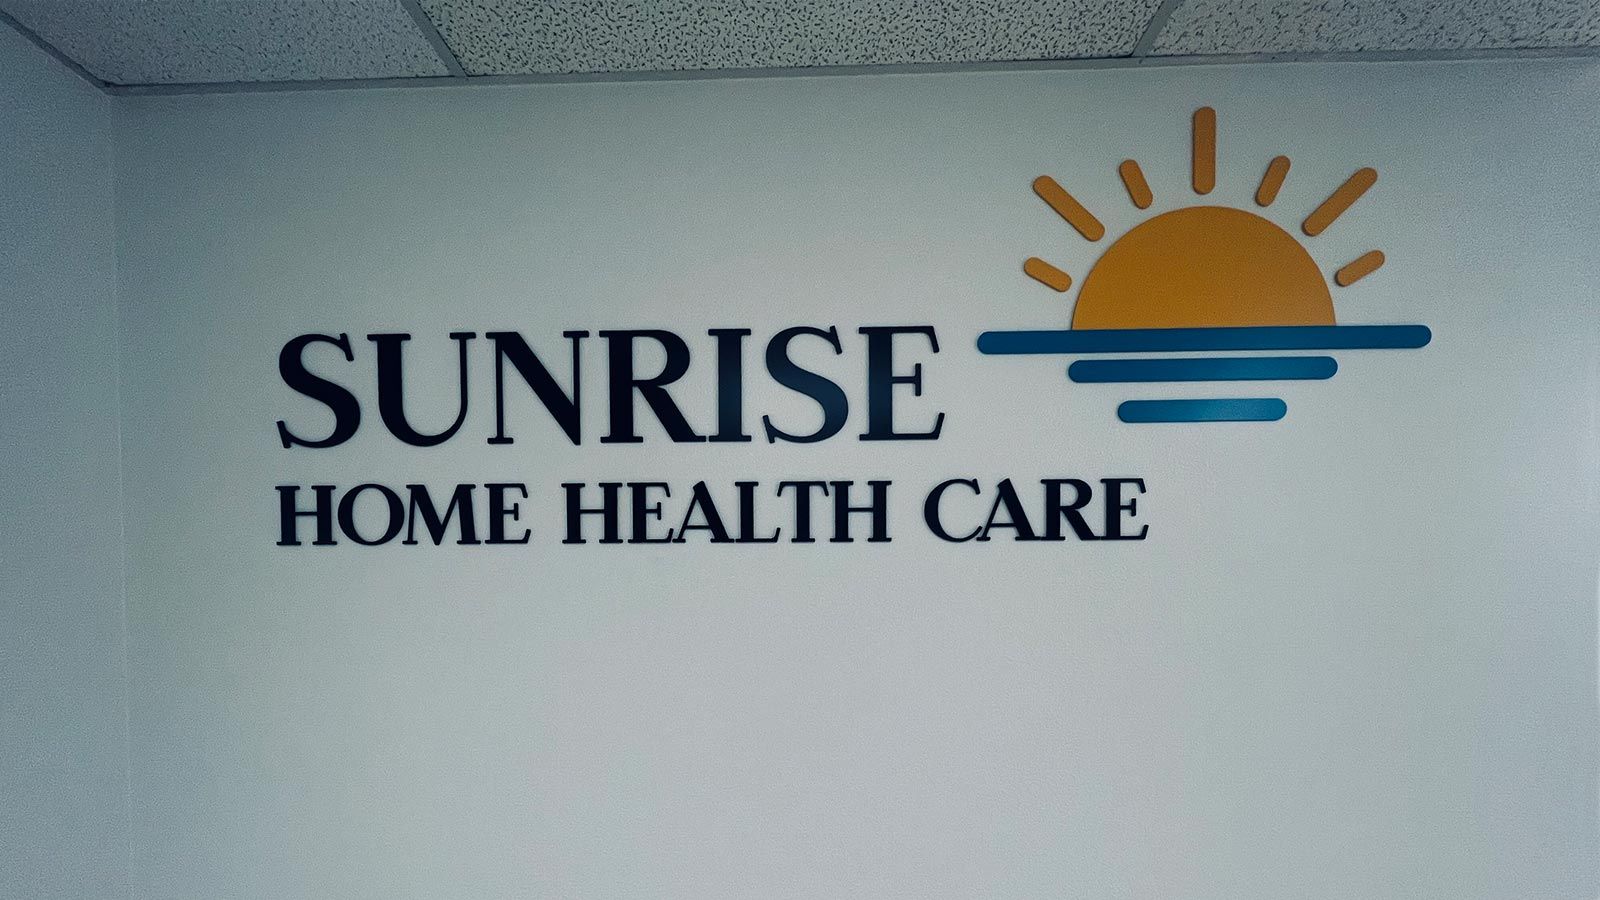 Sunrise Home Health Care office sign attached to the wall